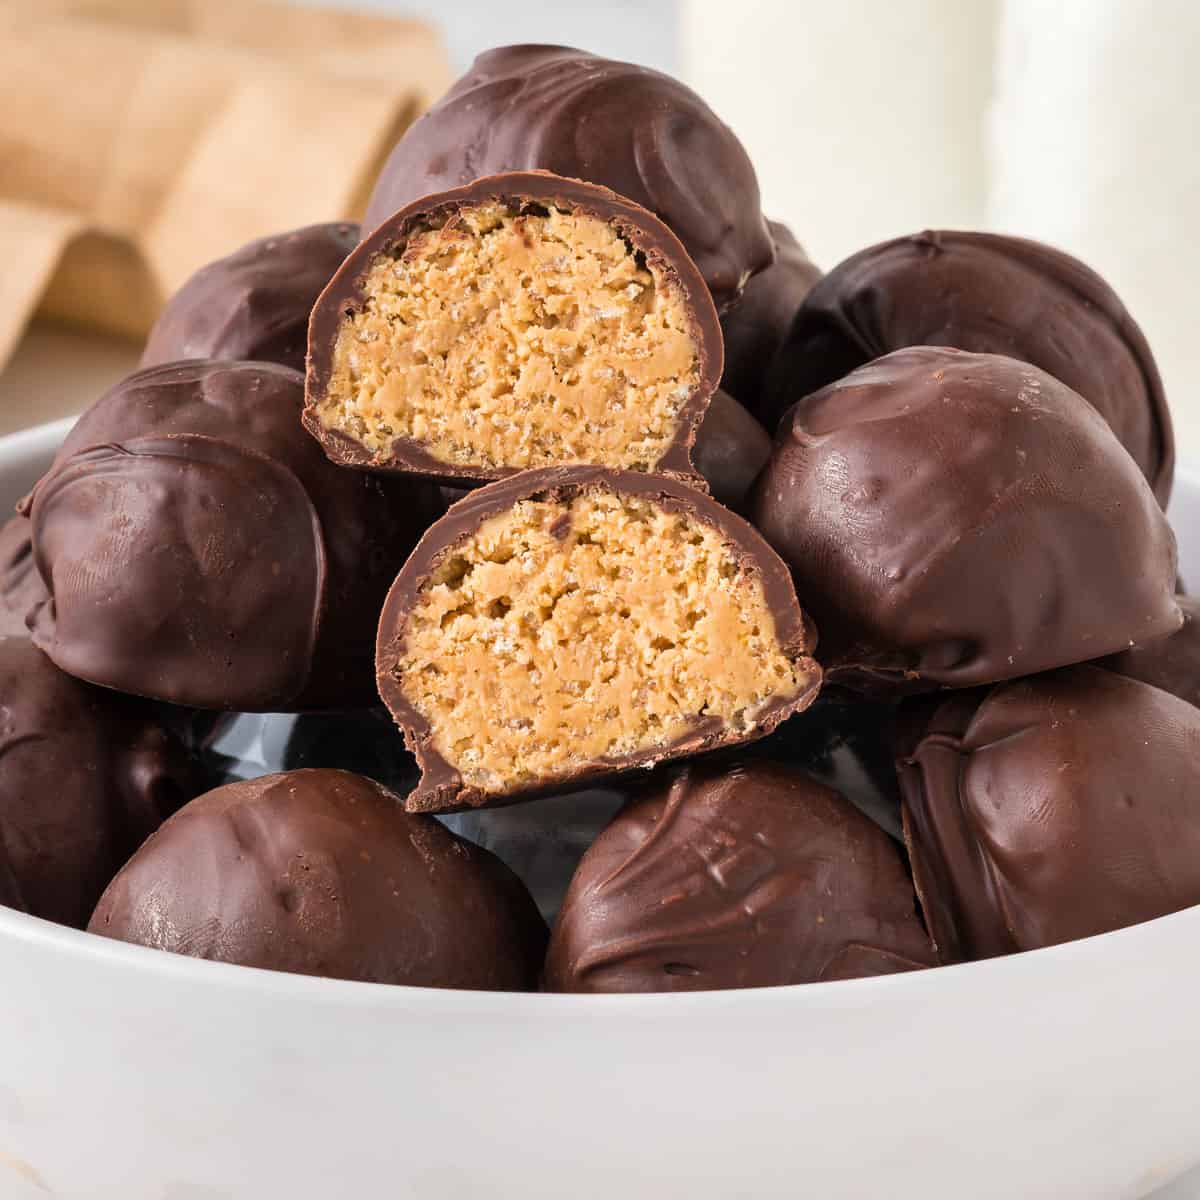 peanut butter balls stacked in a bowl, with one cut open